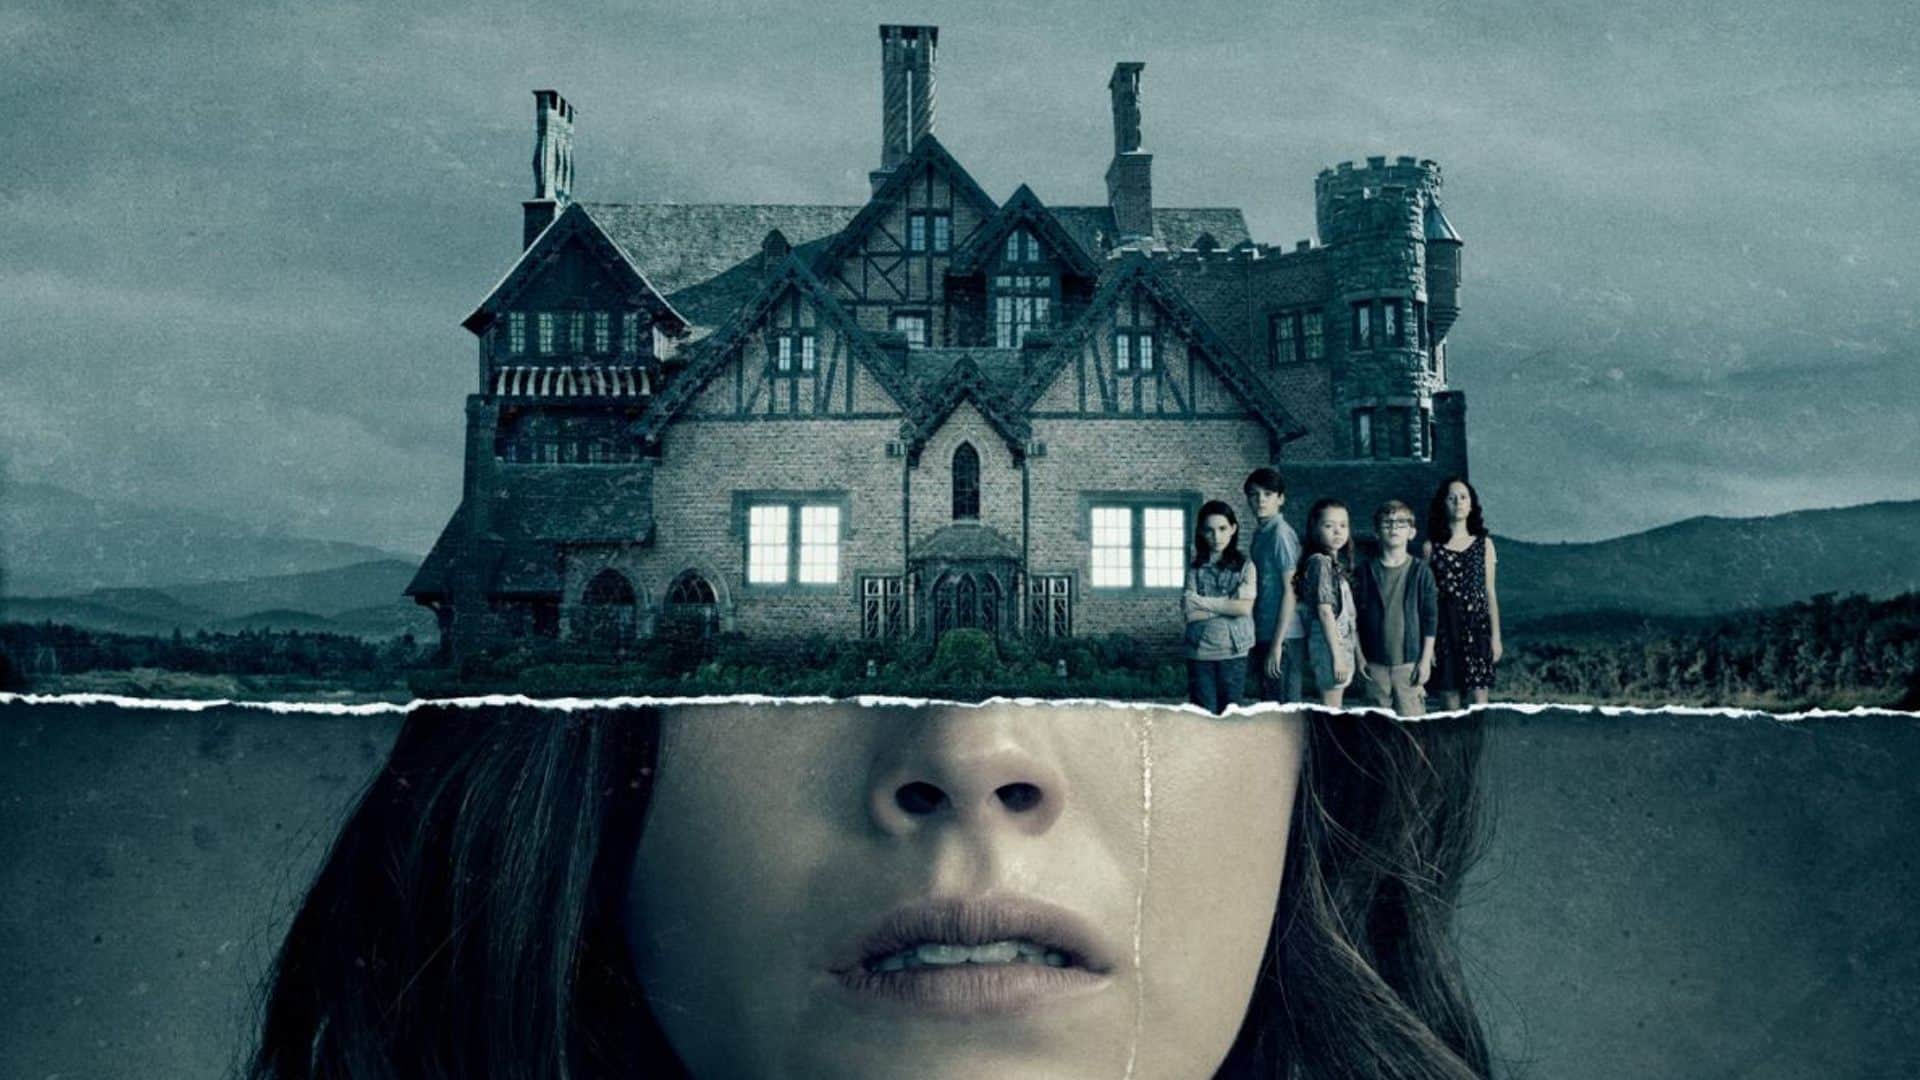 The Haunting of Hill House Season 1 Download 1080p Google Drive